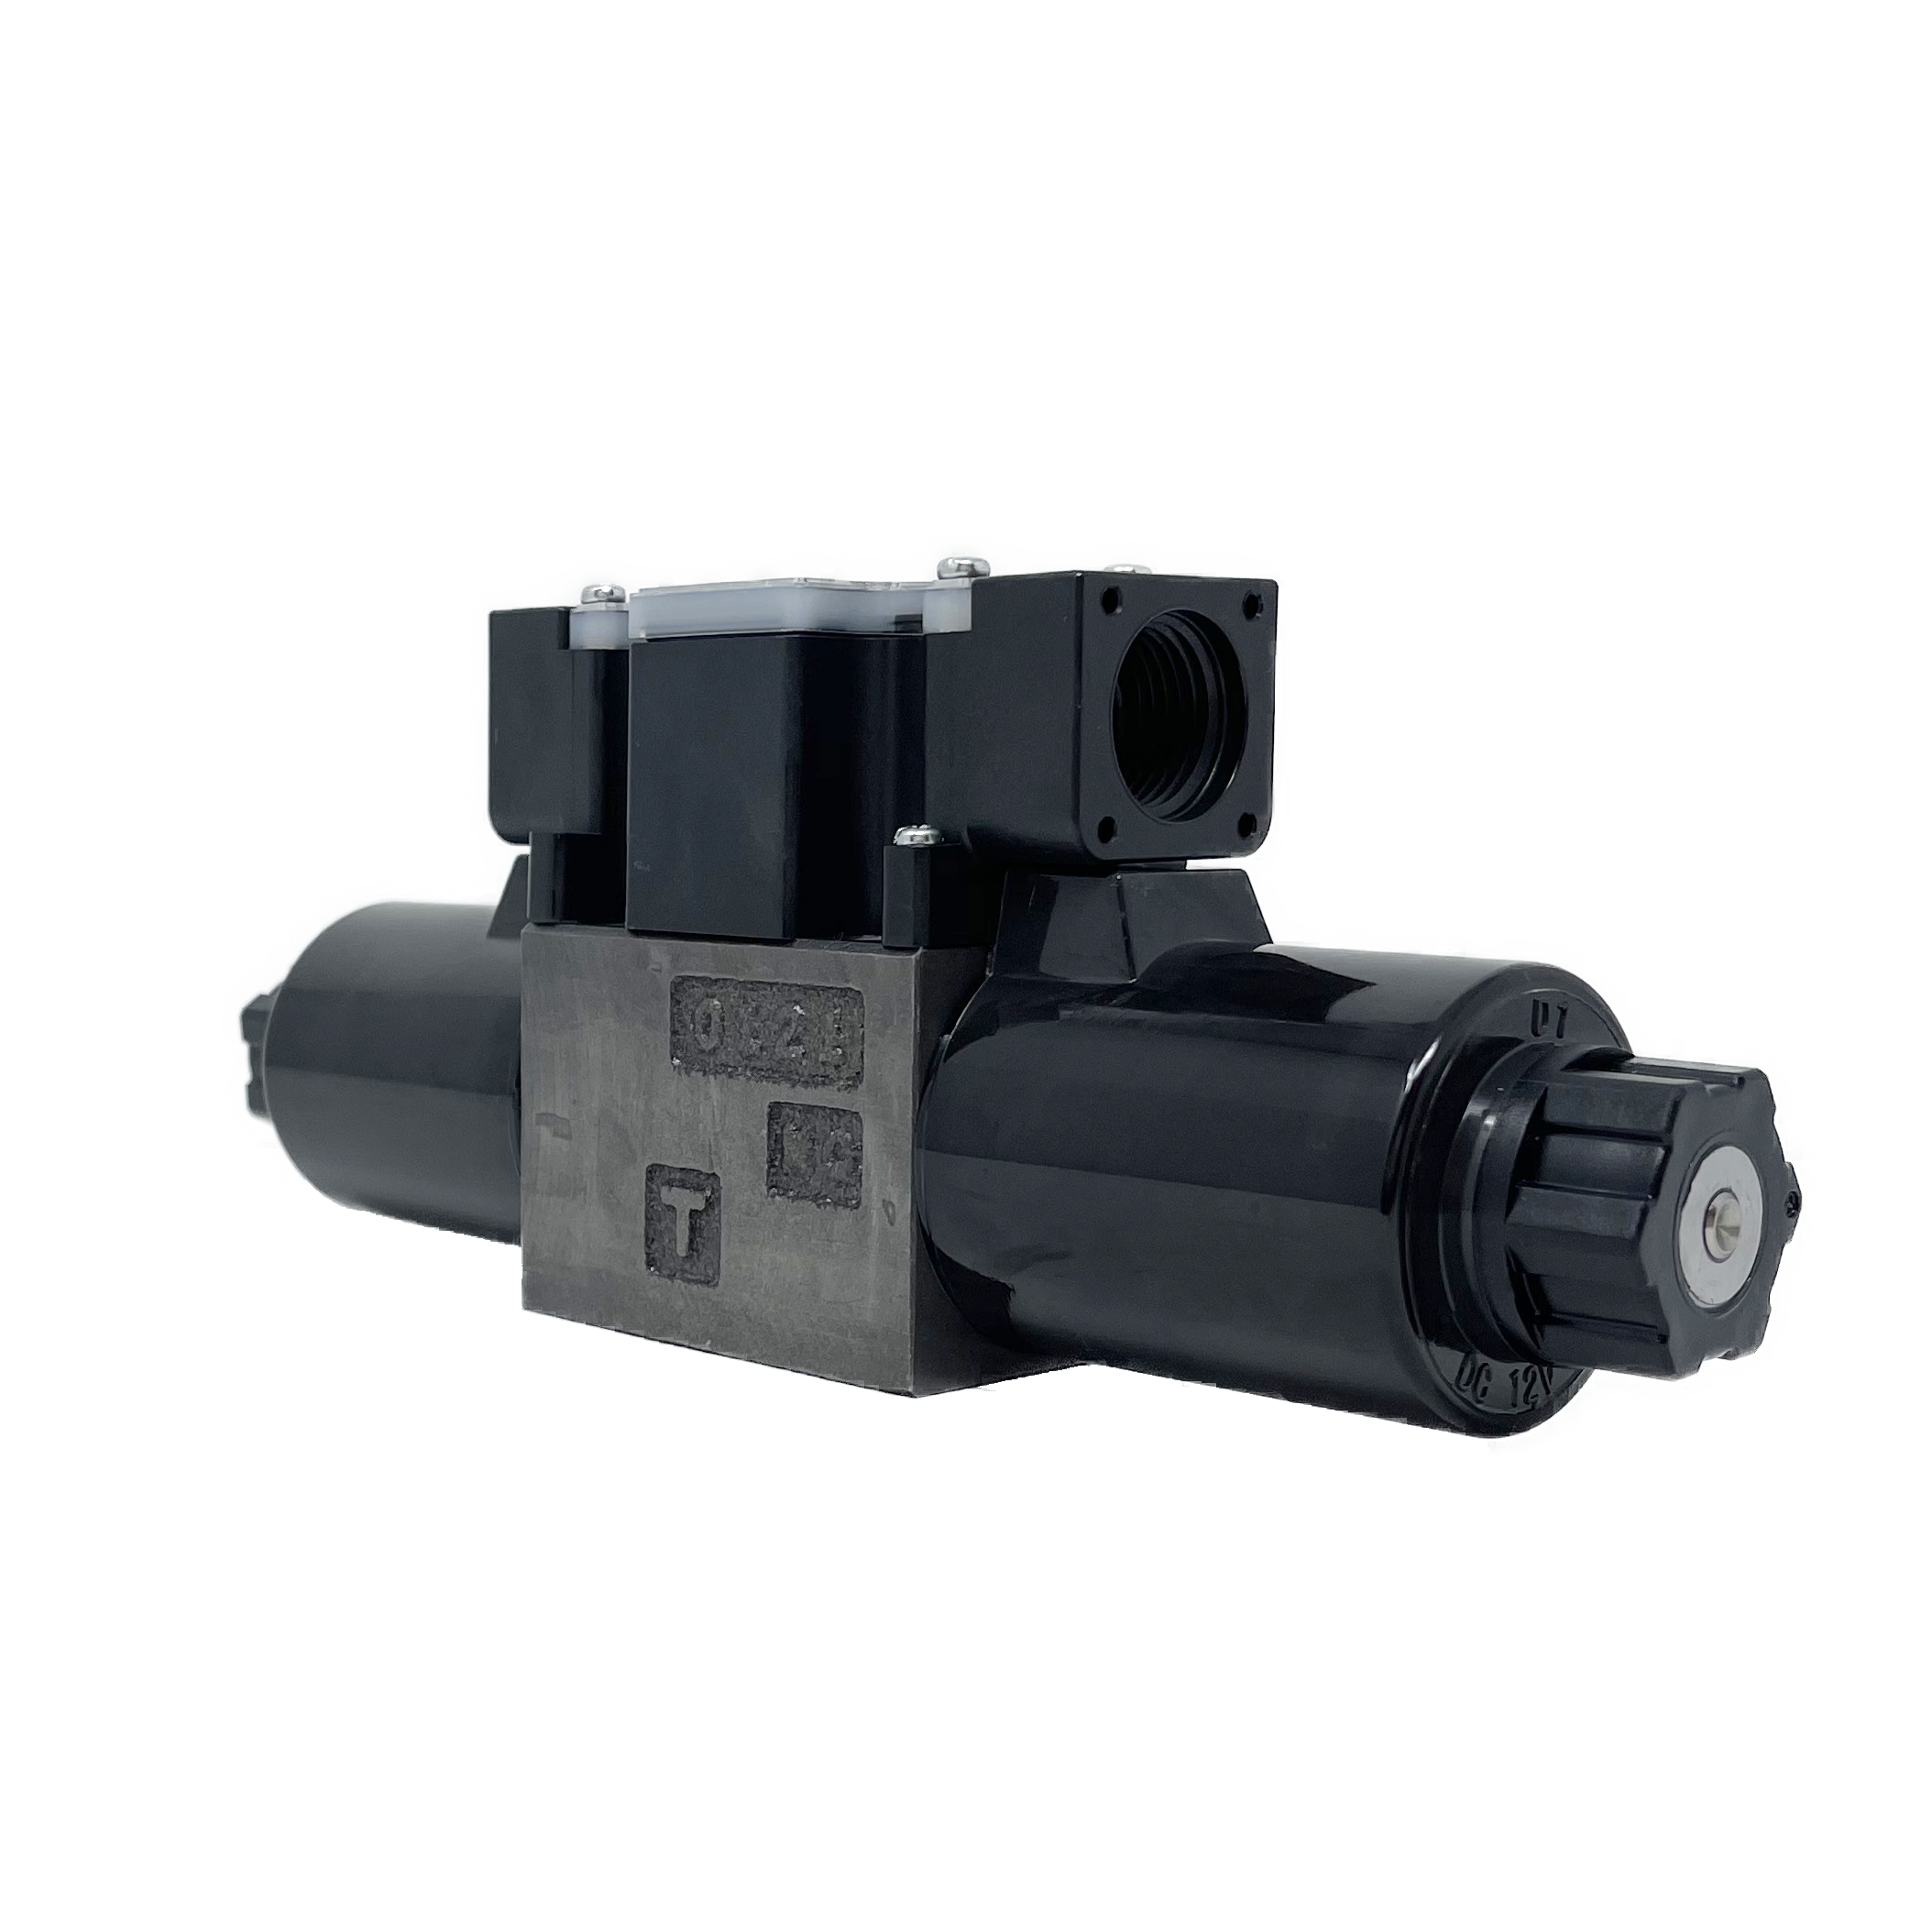 SS-G01-C5-R-E115-E31 : Nachi Solenoid Valve, 3P4W, D03 (NG6), 26.4GPM, 5075psi, All Ports Blocked Neutral, 115 VAC, Wiring Box with Lights